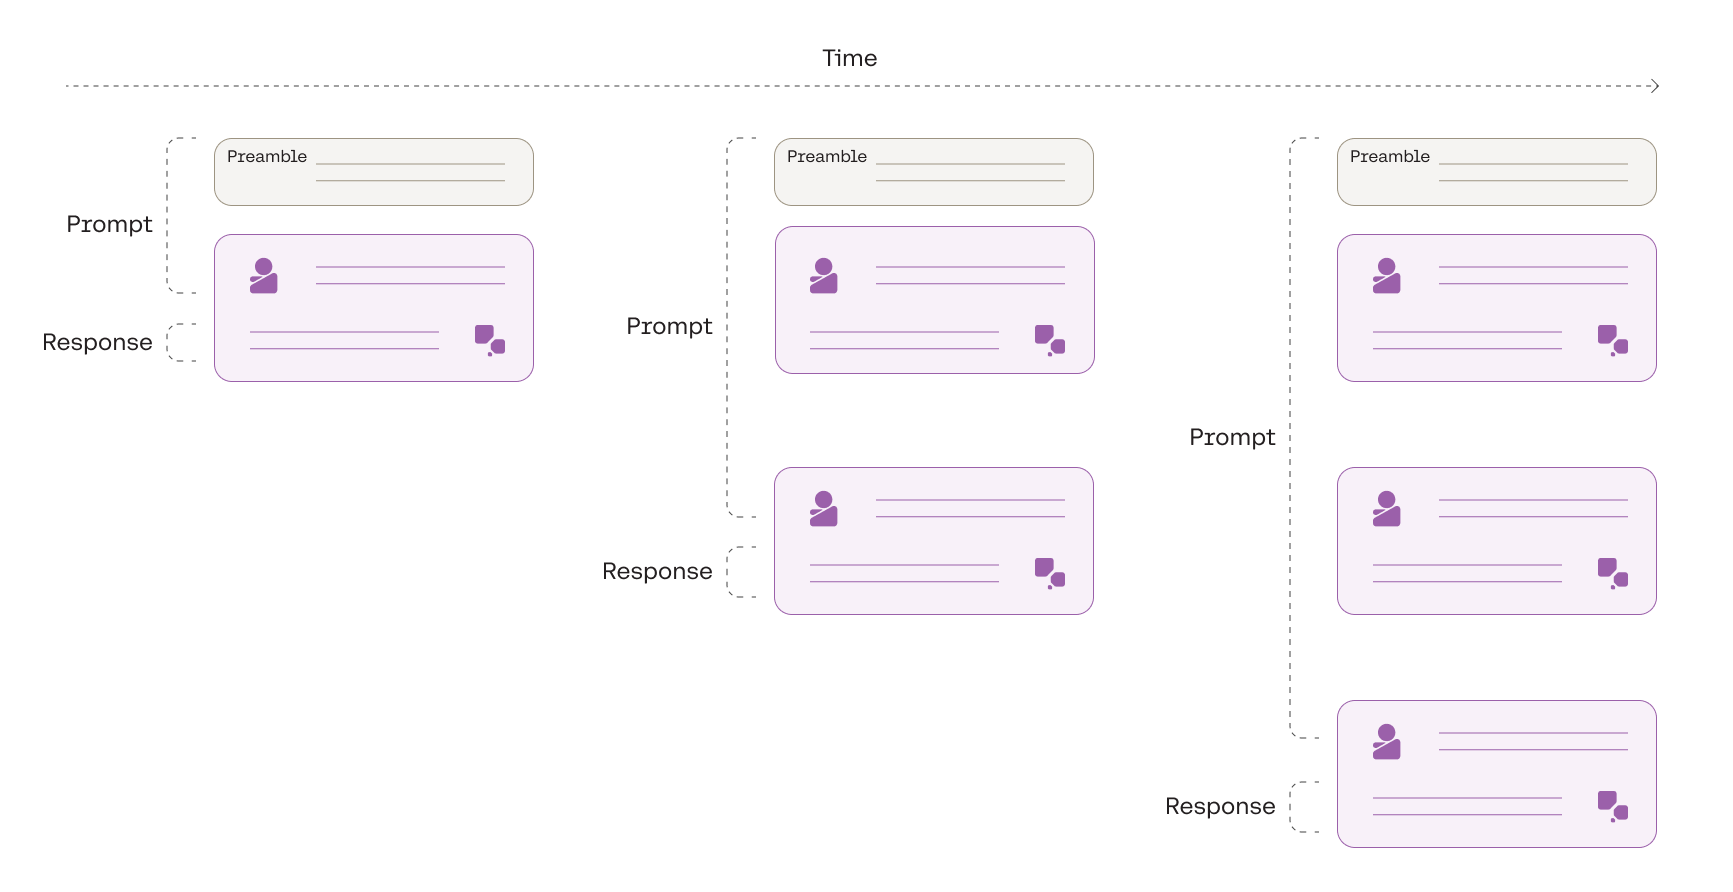 Building a conversation by stitching multiple prompt-response pairs together